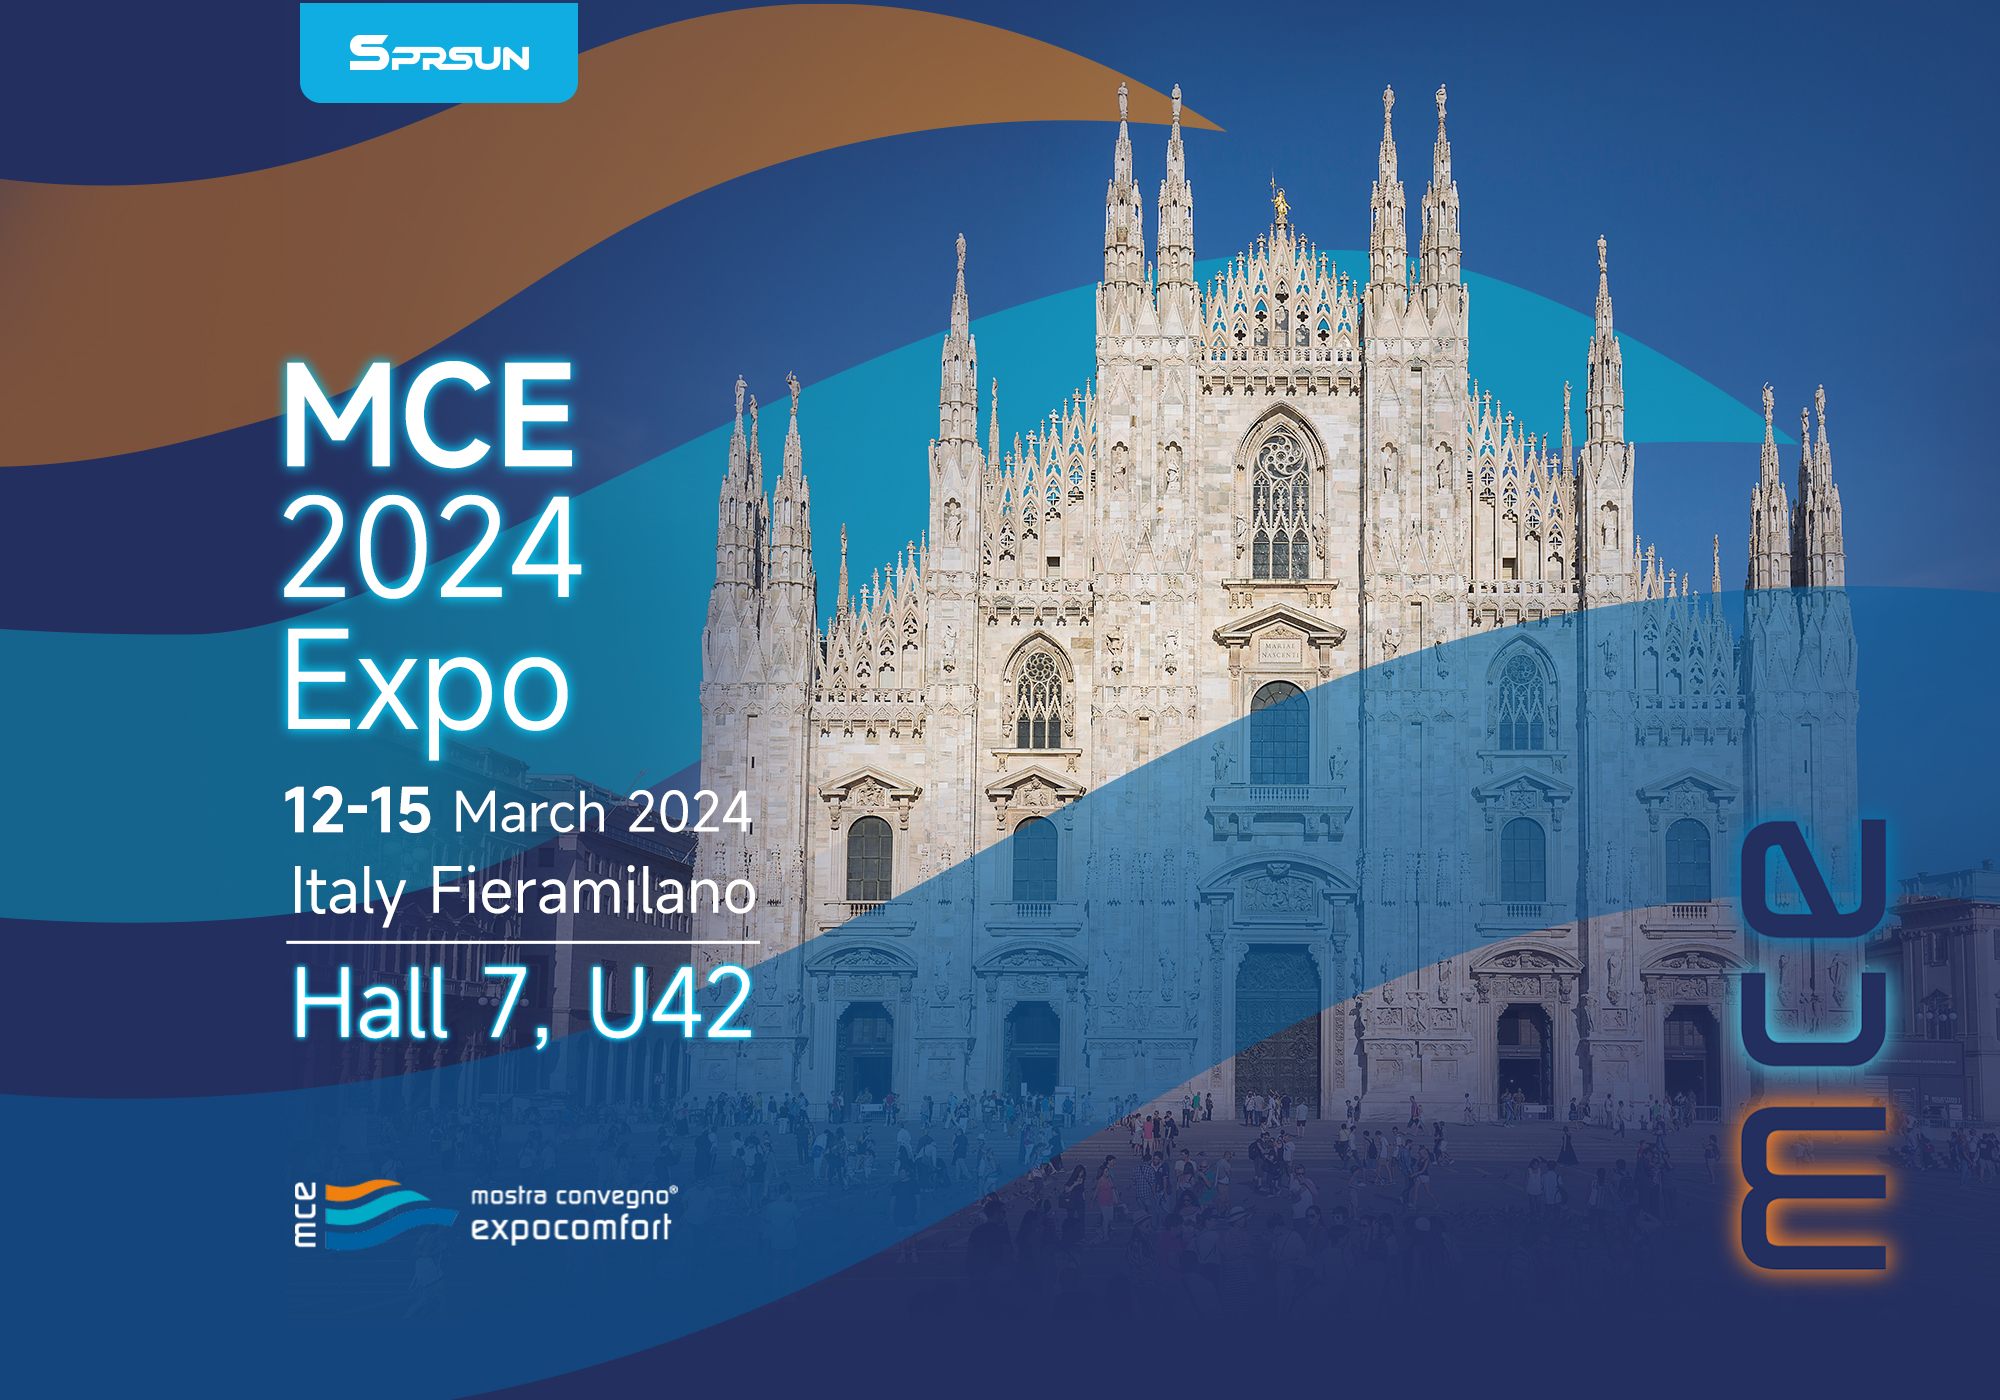 SPRSUN's Newest Ultra-Quiet R290 Heat Pump to be Unveiled at the MCE Exhibition in Italy.